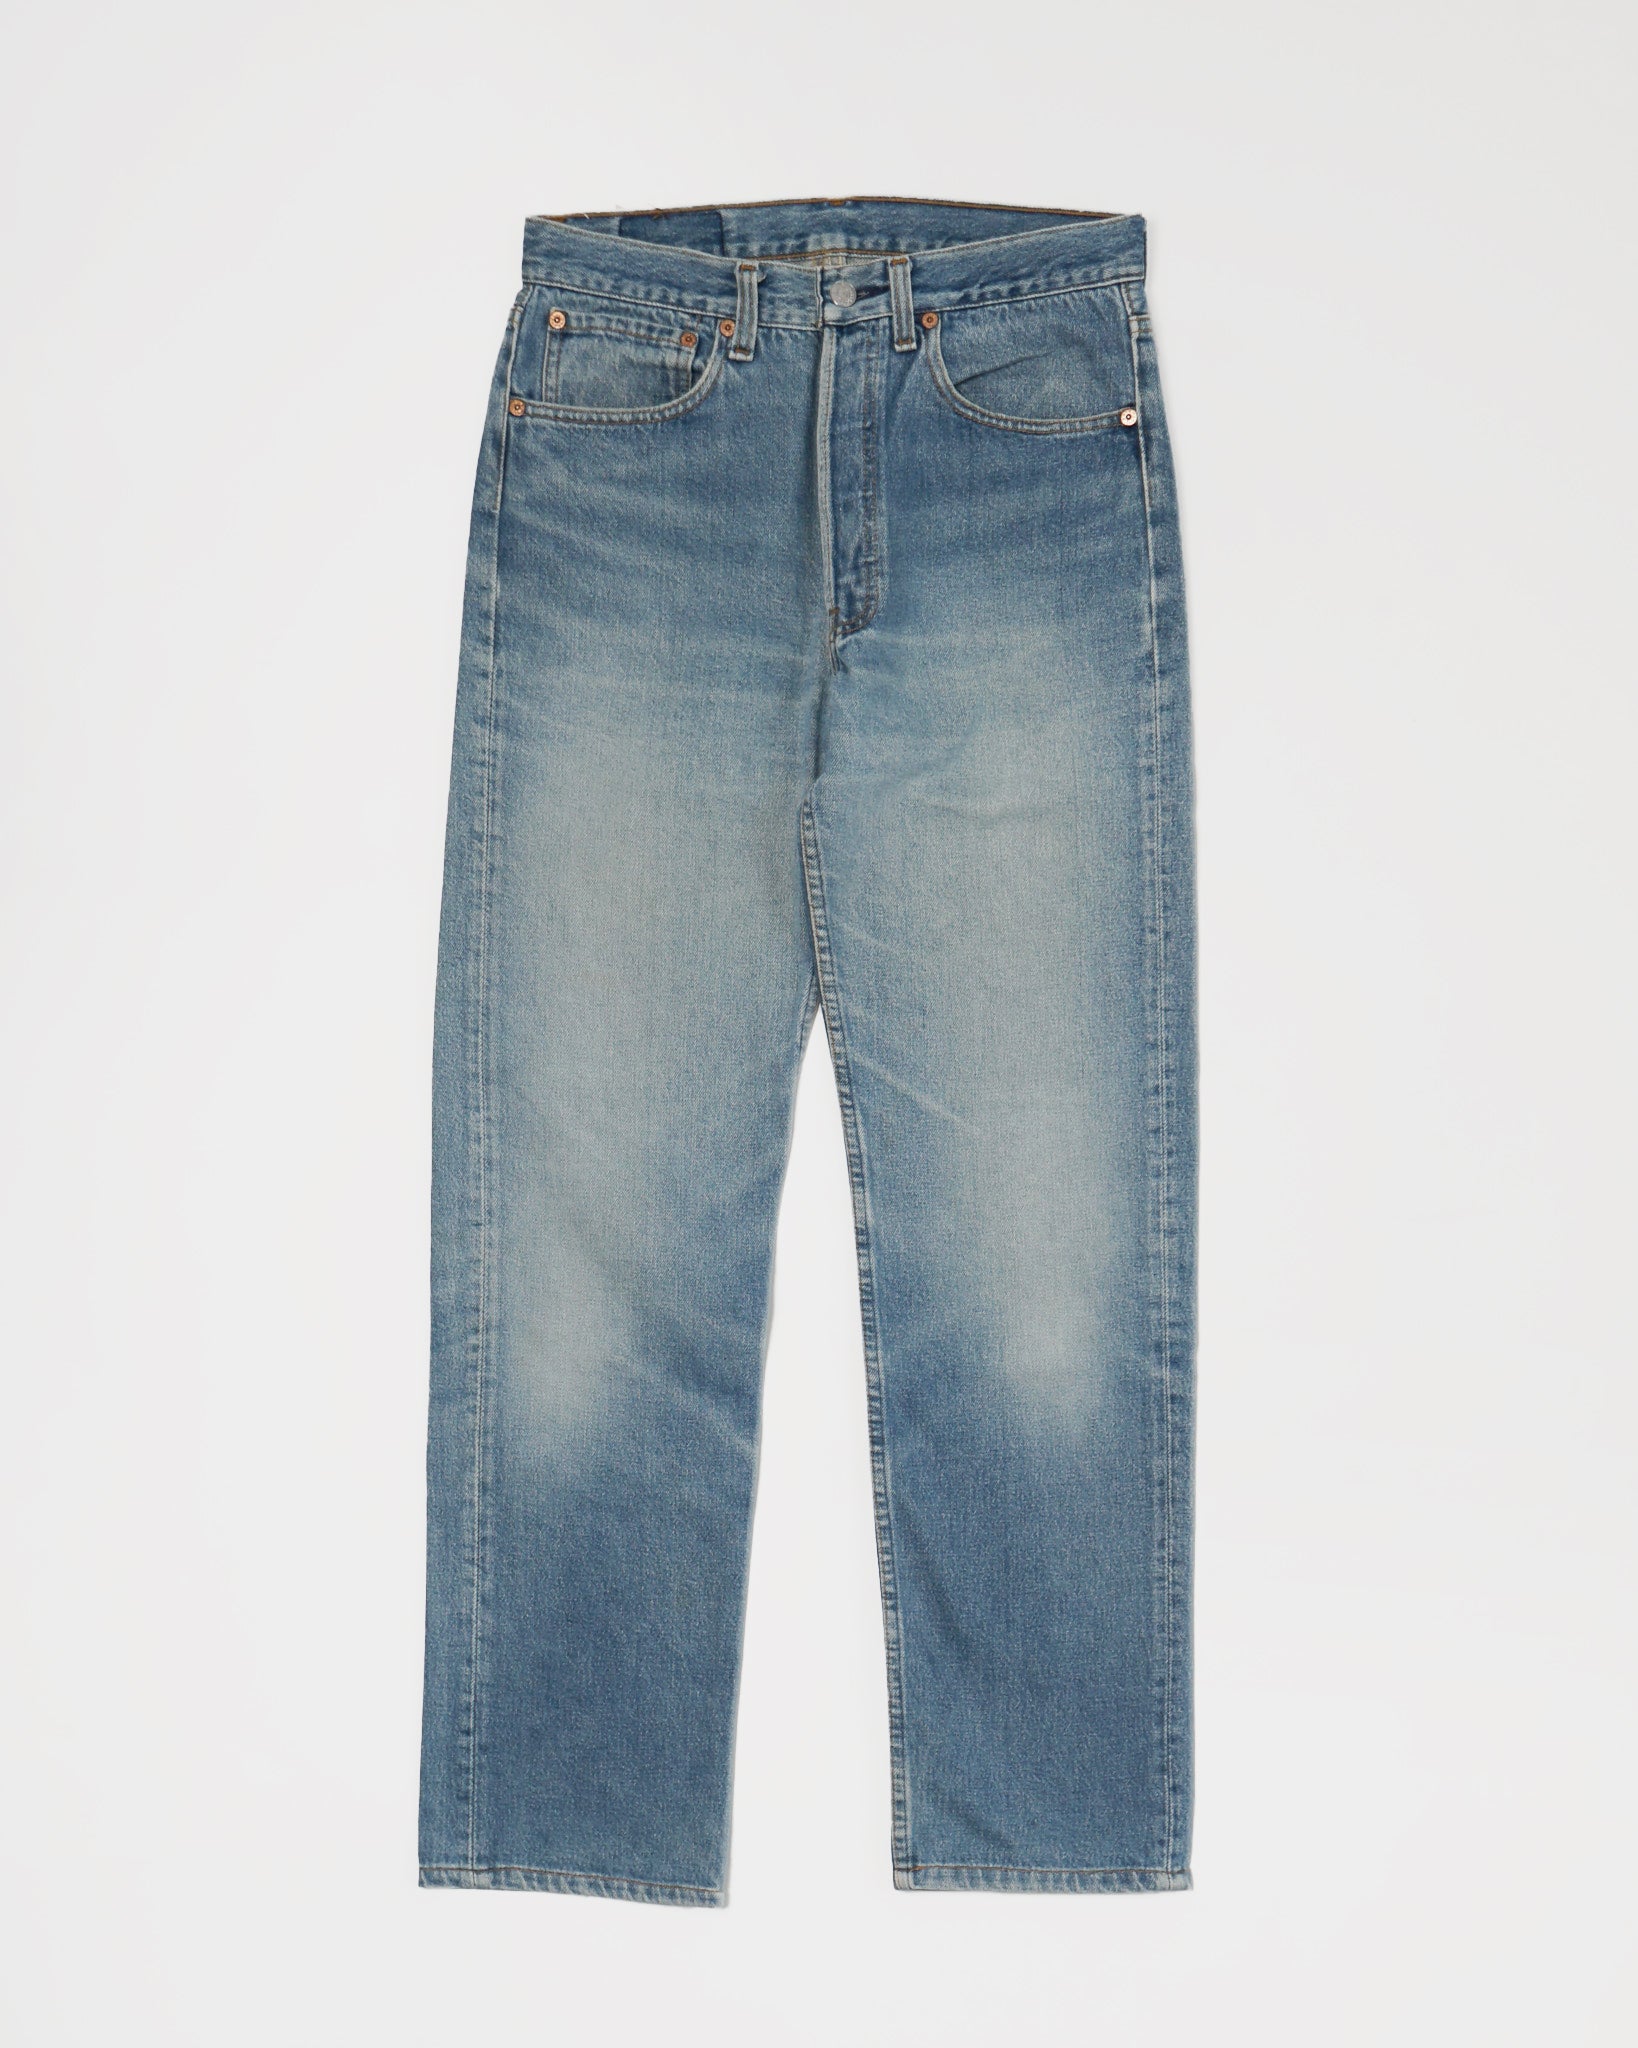 Levi's - 501 Jeans / Shout Out Stone - Biscuit General Store